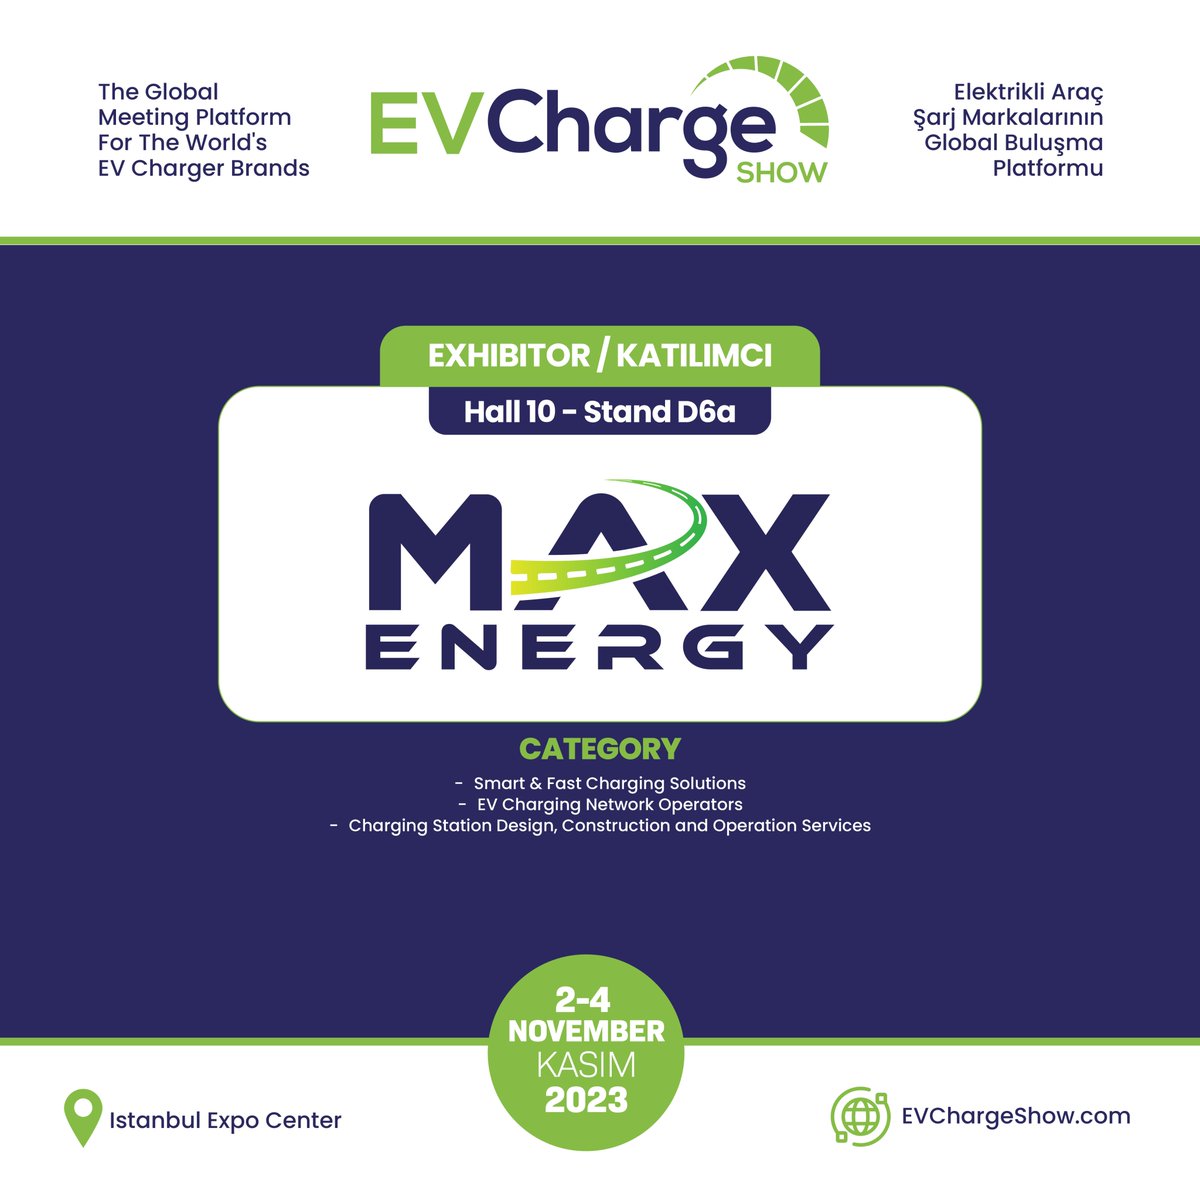 Max Charge is in the EV Charge Show!
Max Charge da EV Charge Show'da!

Become an exhibitor: evchargeshow.com/become-an-exhi…
Katılımcı olun: evchargeshow.com/tr/standli-kat…

#EVChargeShow #evcharger #chargingstations #emobility